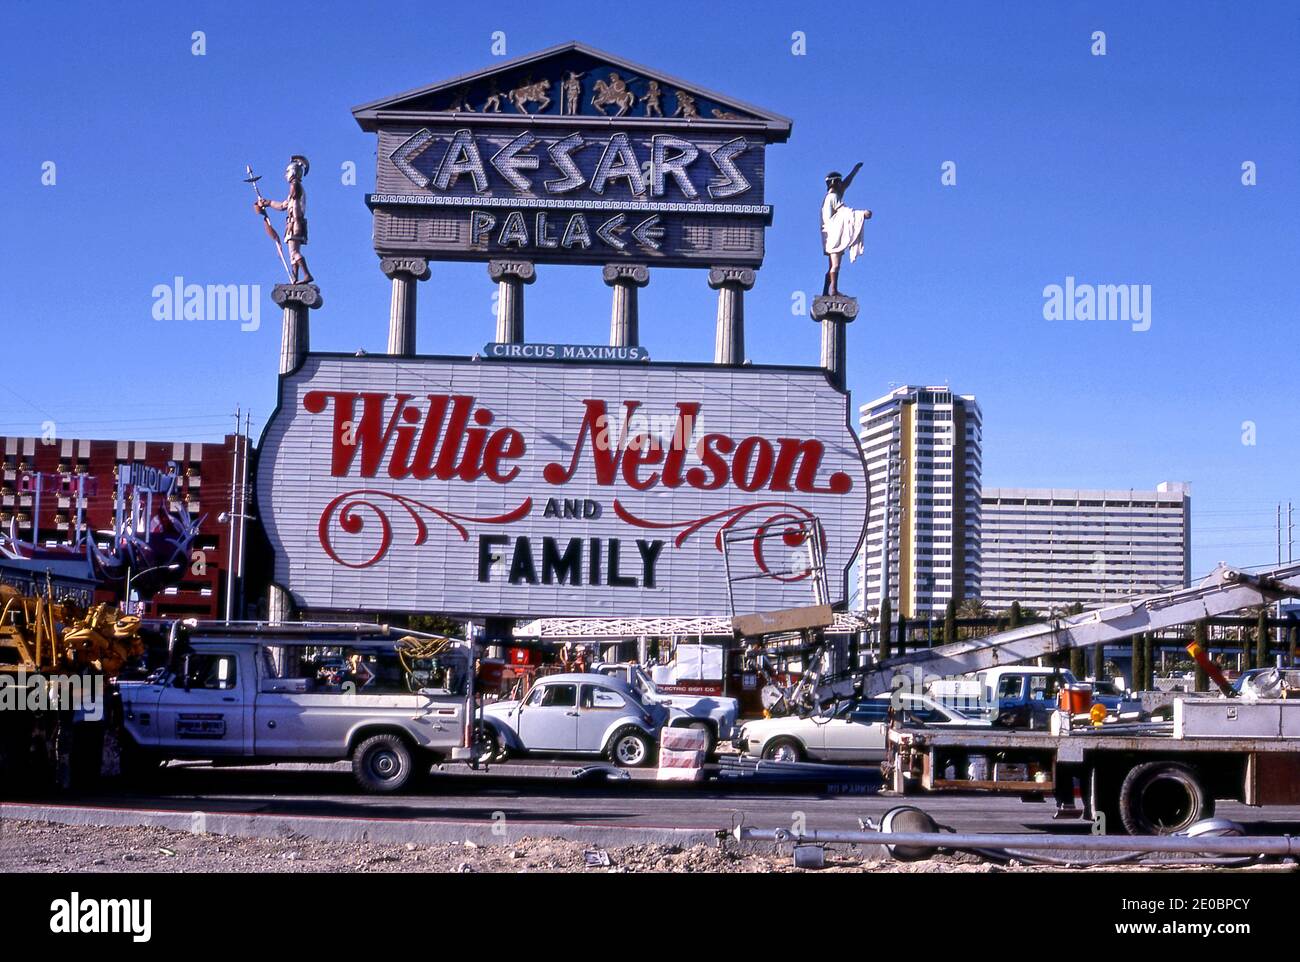 Marquee for Circus Maximus at Caesar's Palace promotes a concert by Willie Nelson in Las Vegas, Nevada Stock Photo